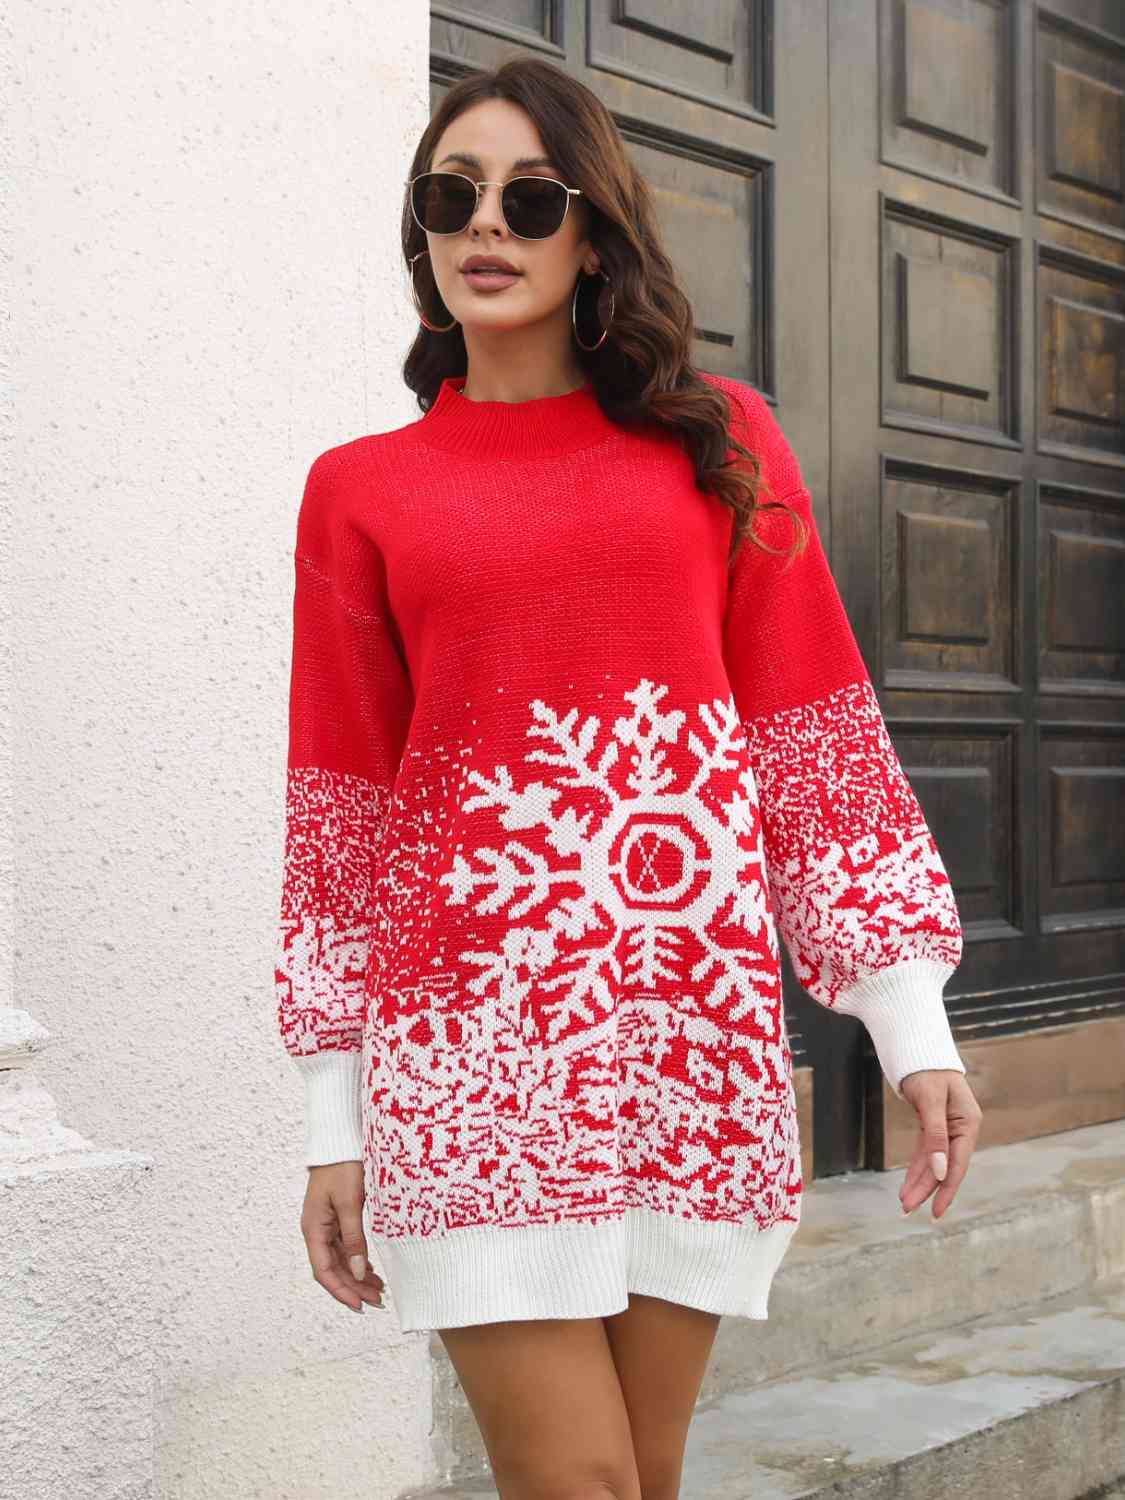 Snowflake Pattern Long Length Sweater (2 Colors) Shirts & Tops Krazy Heart Designs Boutique Red S 